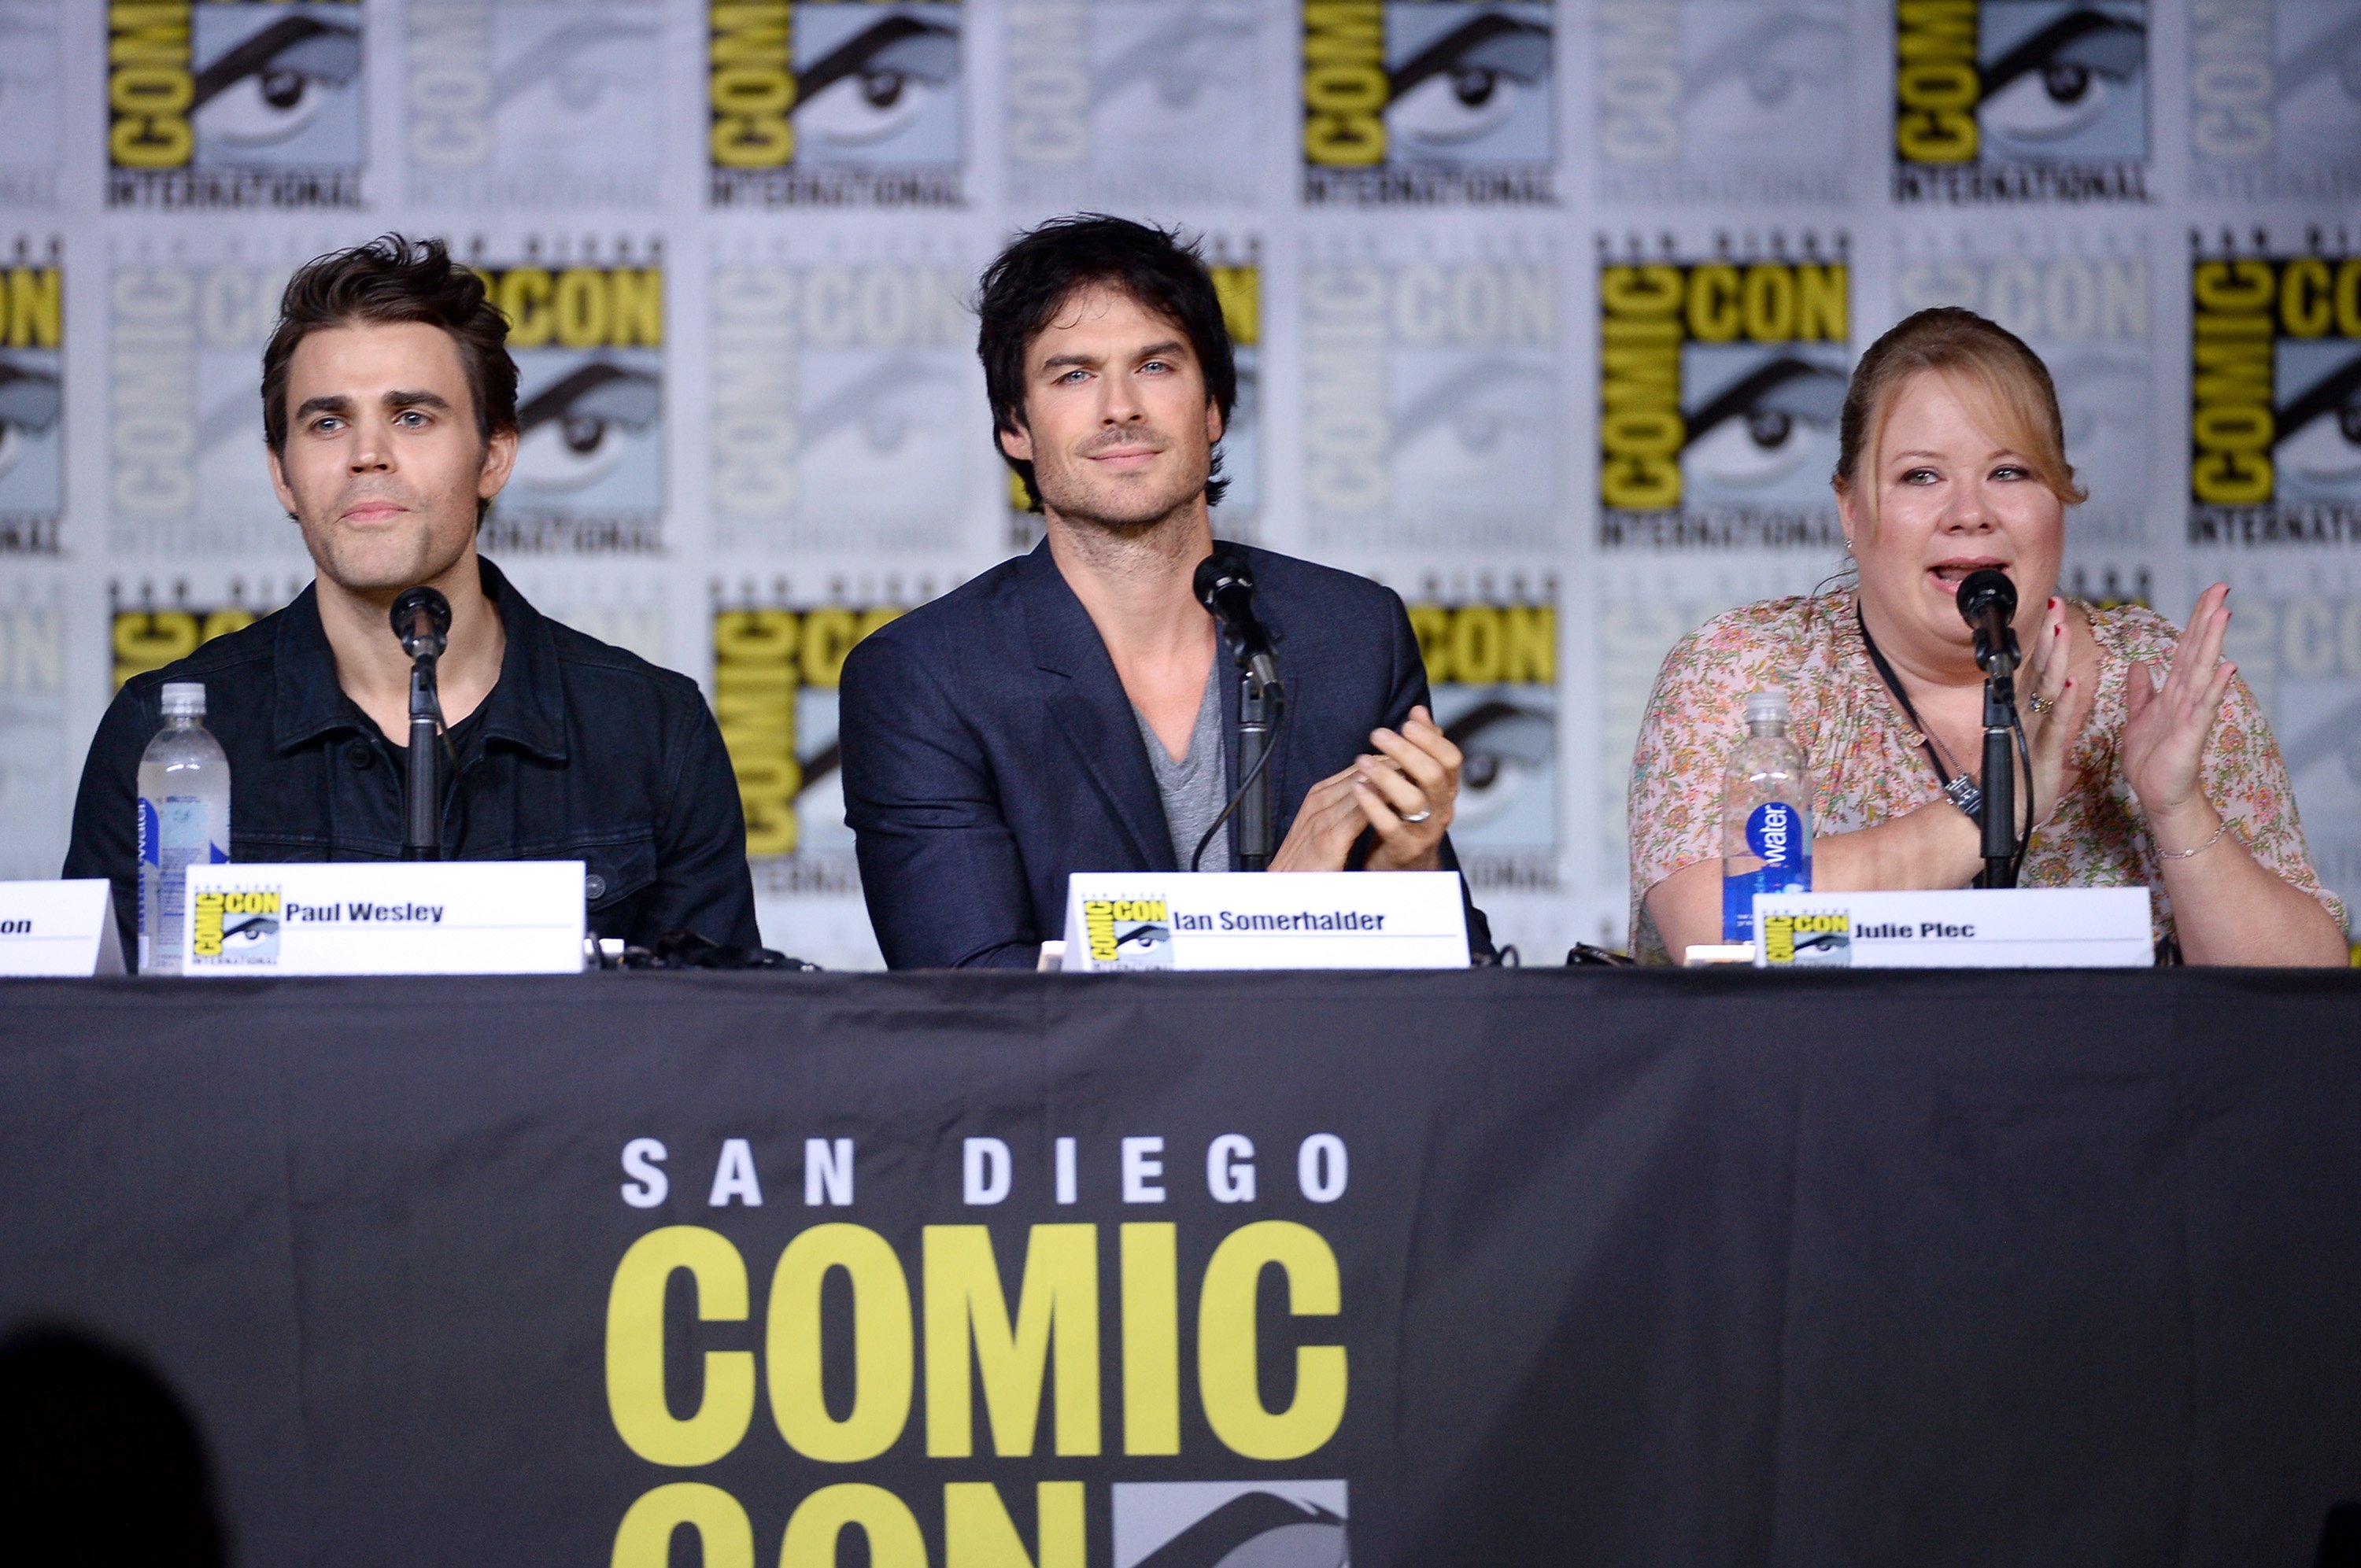 Paul Wesley and Ian Somerhalder and writer/producer Julie Plec for 'The Vampire Diaries' sitting at Comic Con panel table